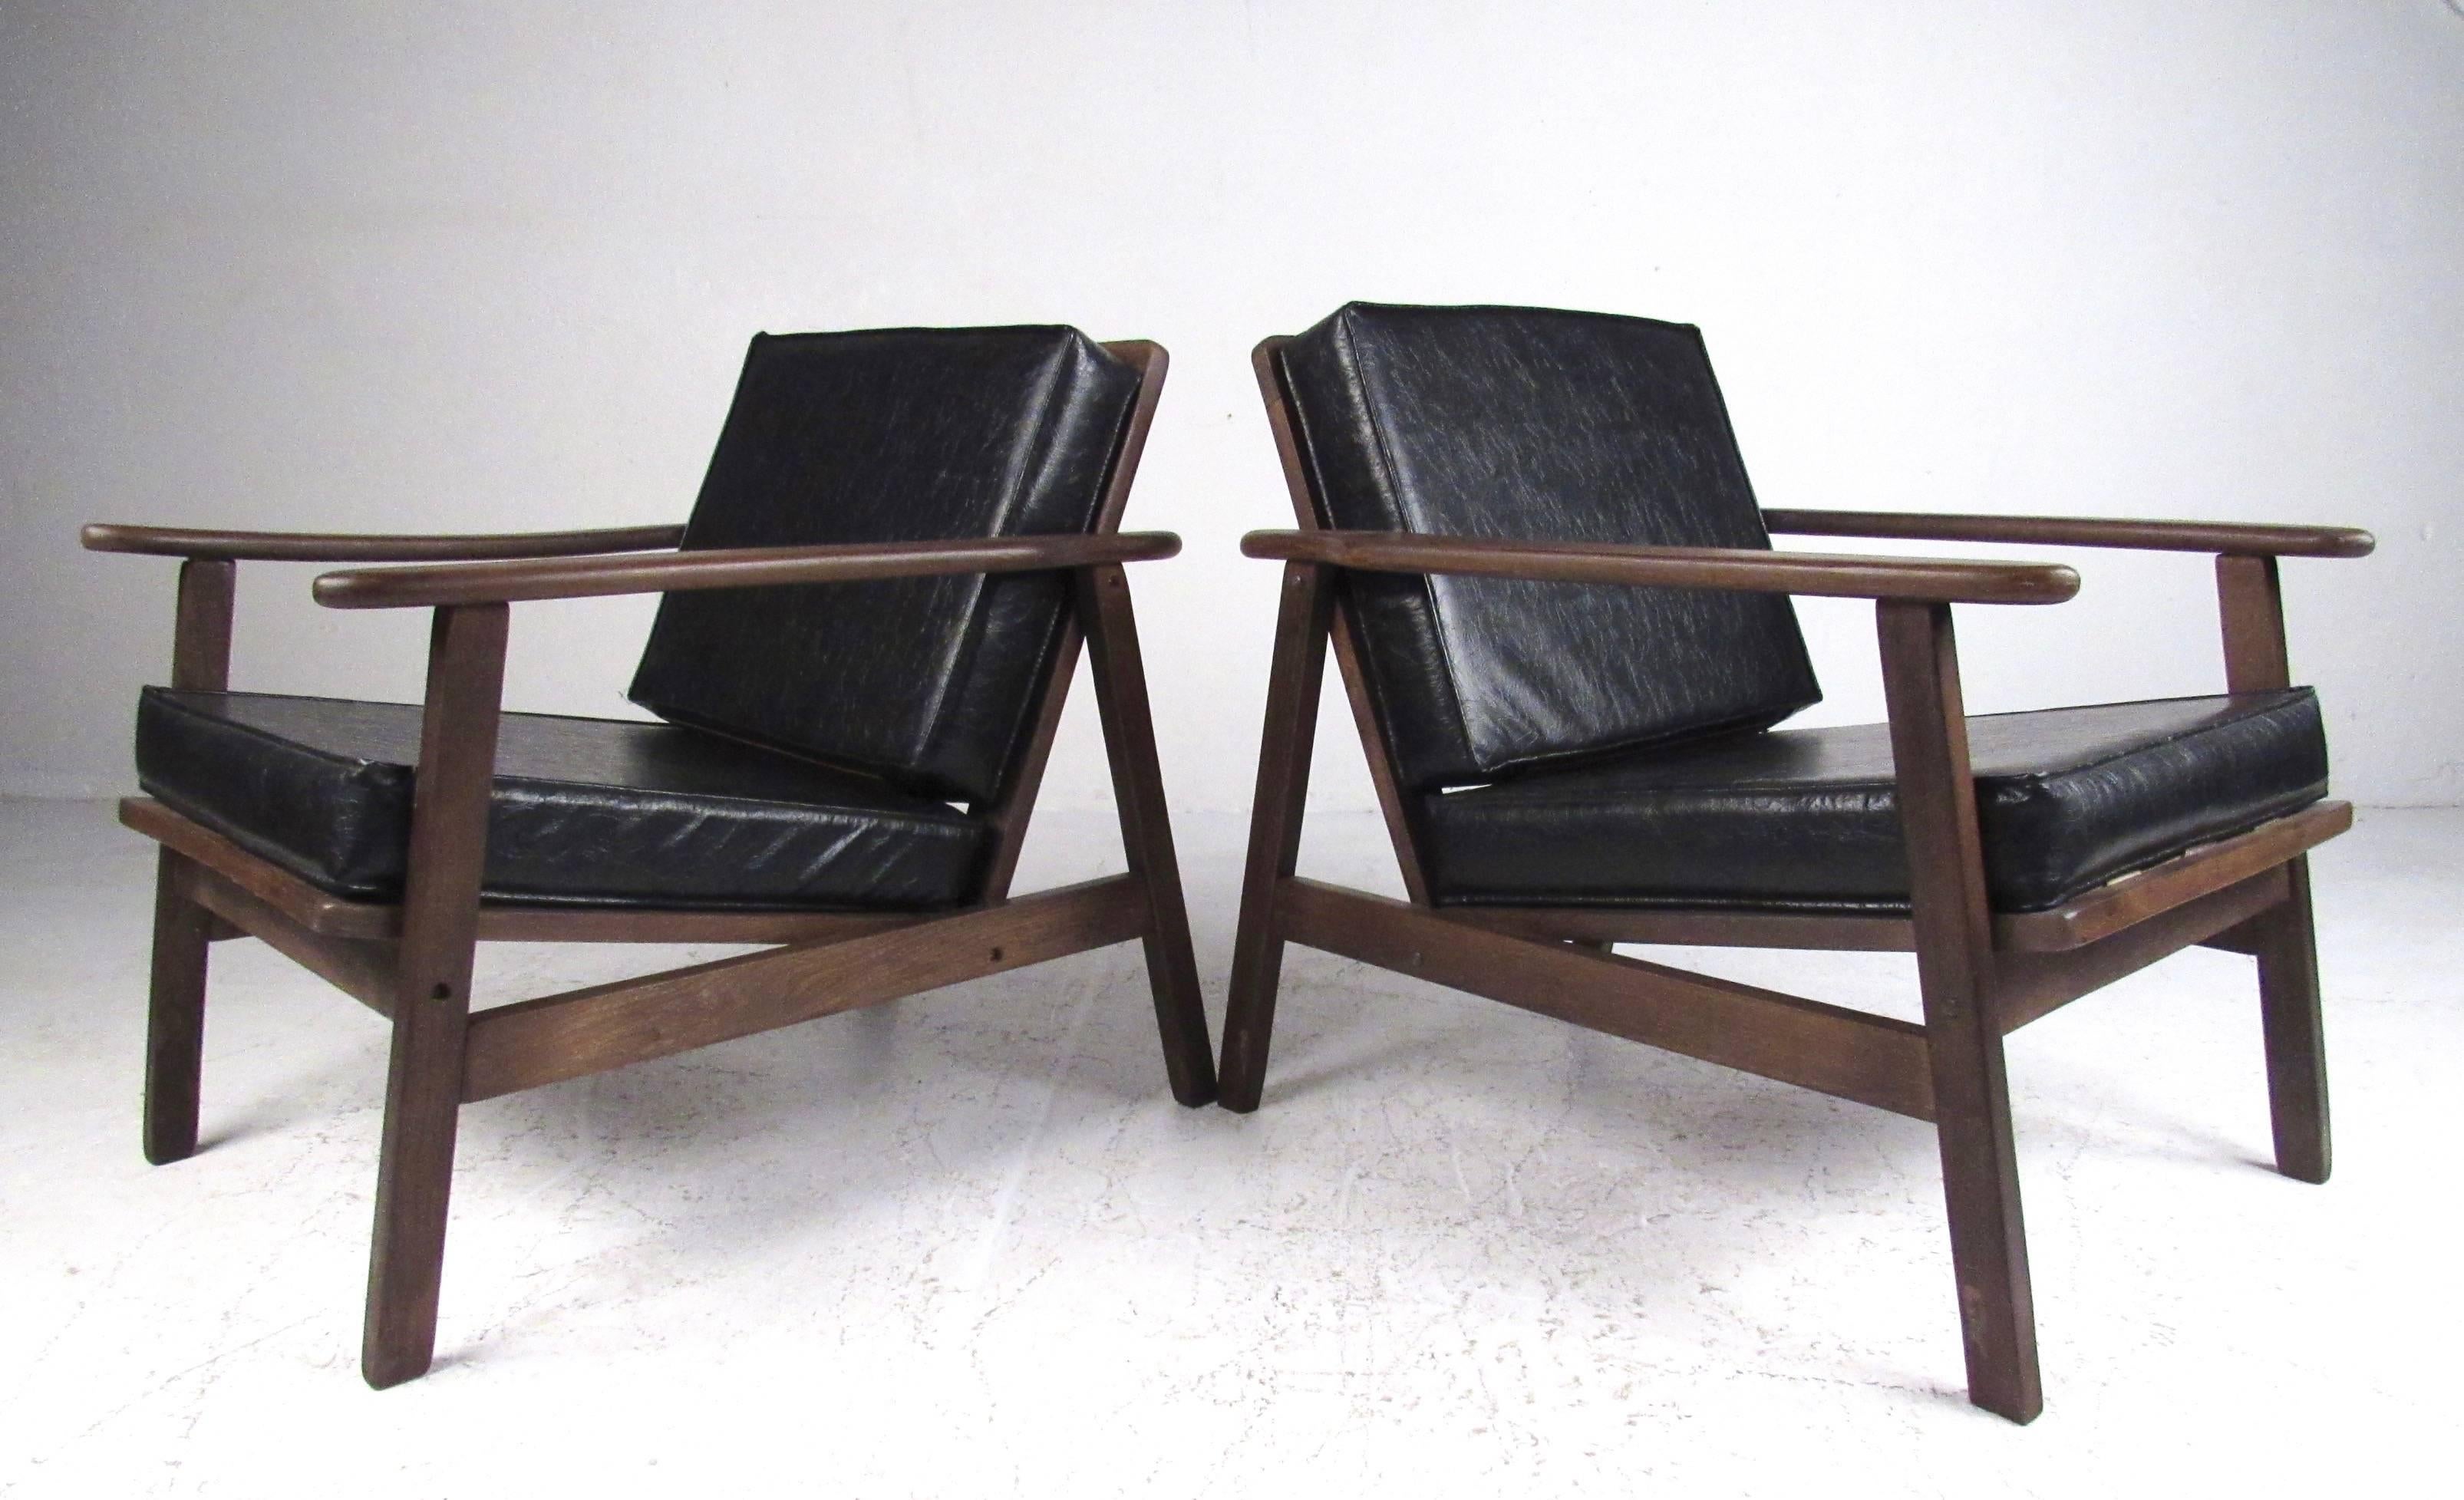 This matching pair of vintage modern lounge chairs feature textured vinyl cushions and hardwood walnut frames. This midcentury pair of armchairs make a stylish retro seating choice for any interior. Please confirm item location (NY or NJ).